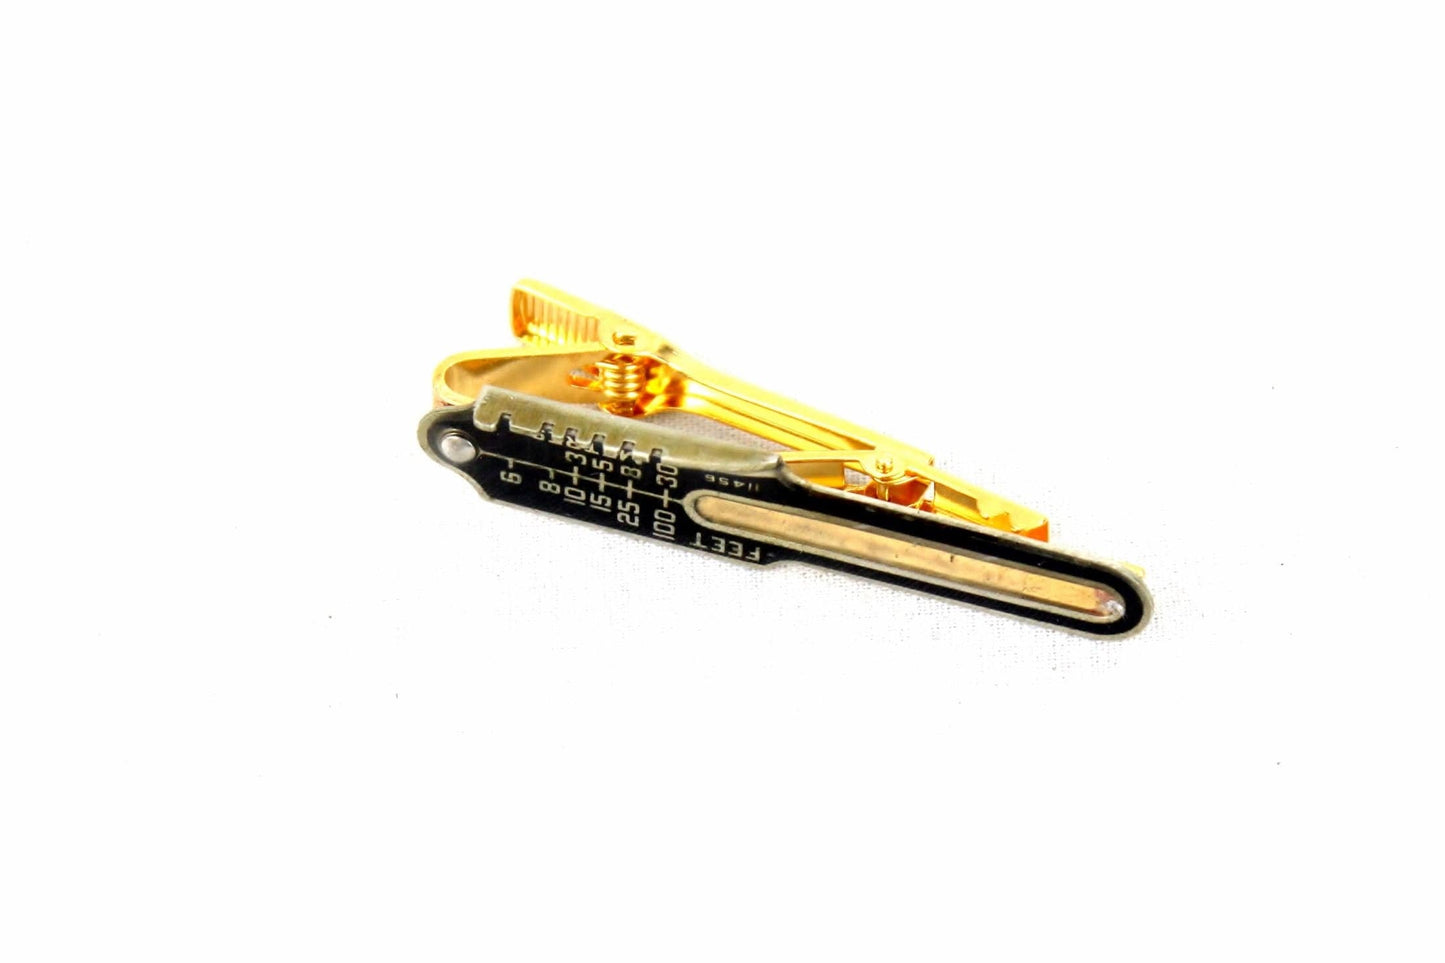 LightAndTimeArt Tie Clips Vintage Kodak Tie Bar - Tie Clip - Gift for dad - Present for husband - Eco-friendly upcycled accessories  - Christmas gift